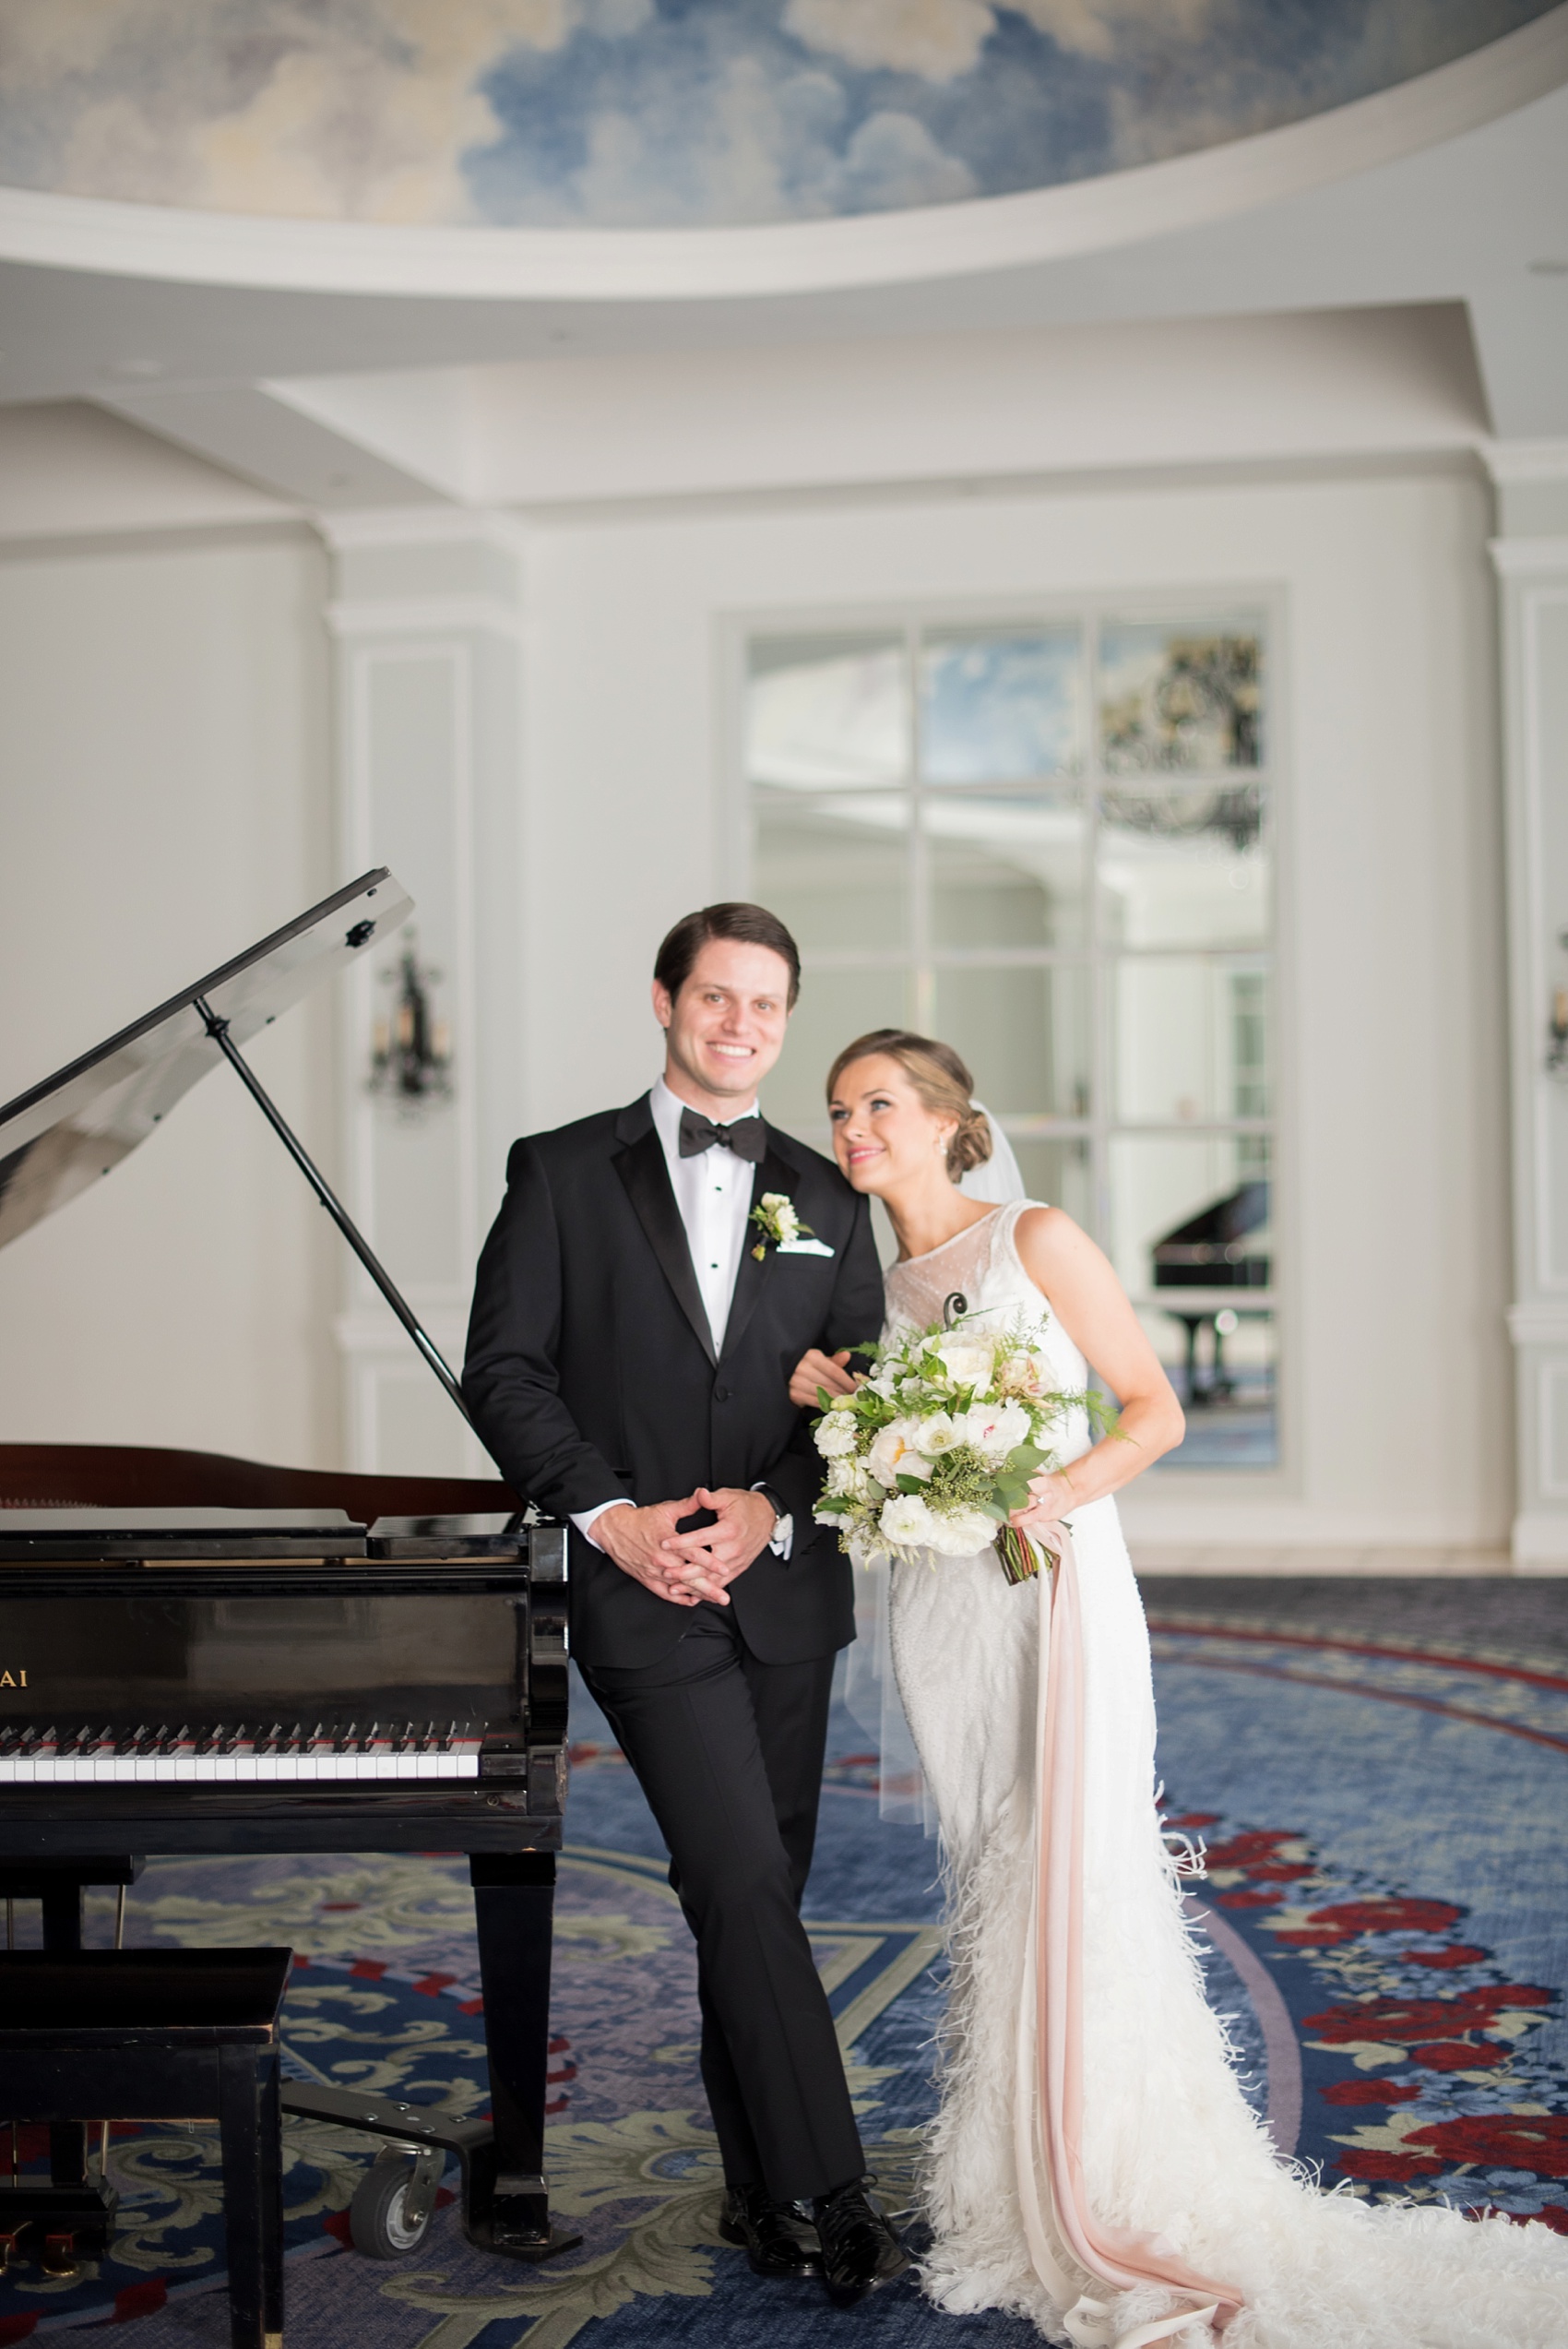 Pearl River Hilton wedding photos of bride and groom. Images by Mikkel Paige Photography, NYC wedding photographer.